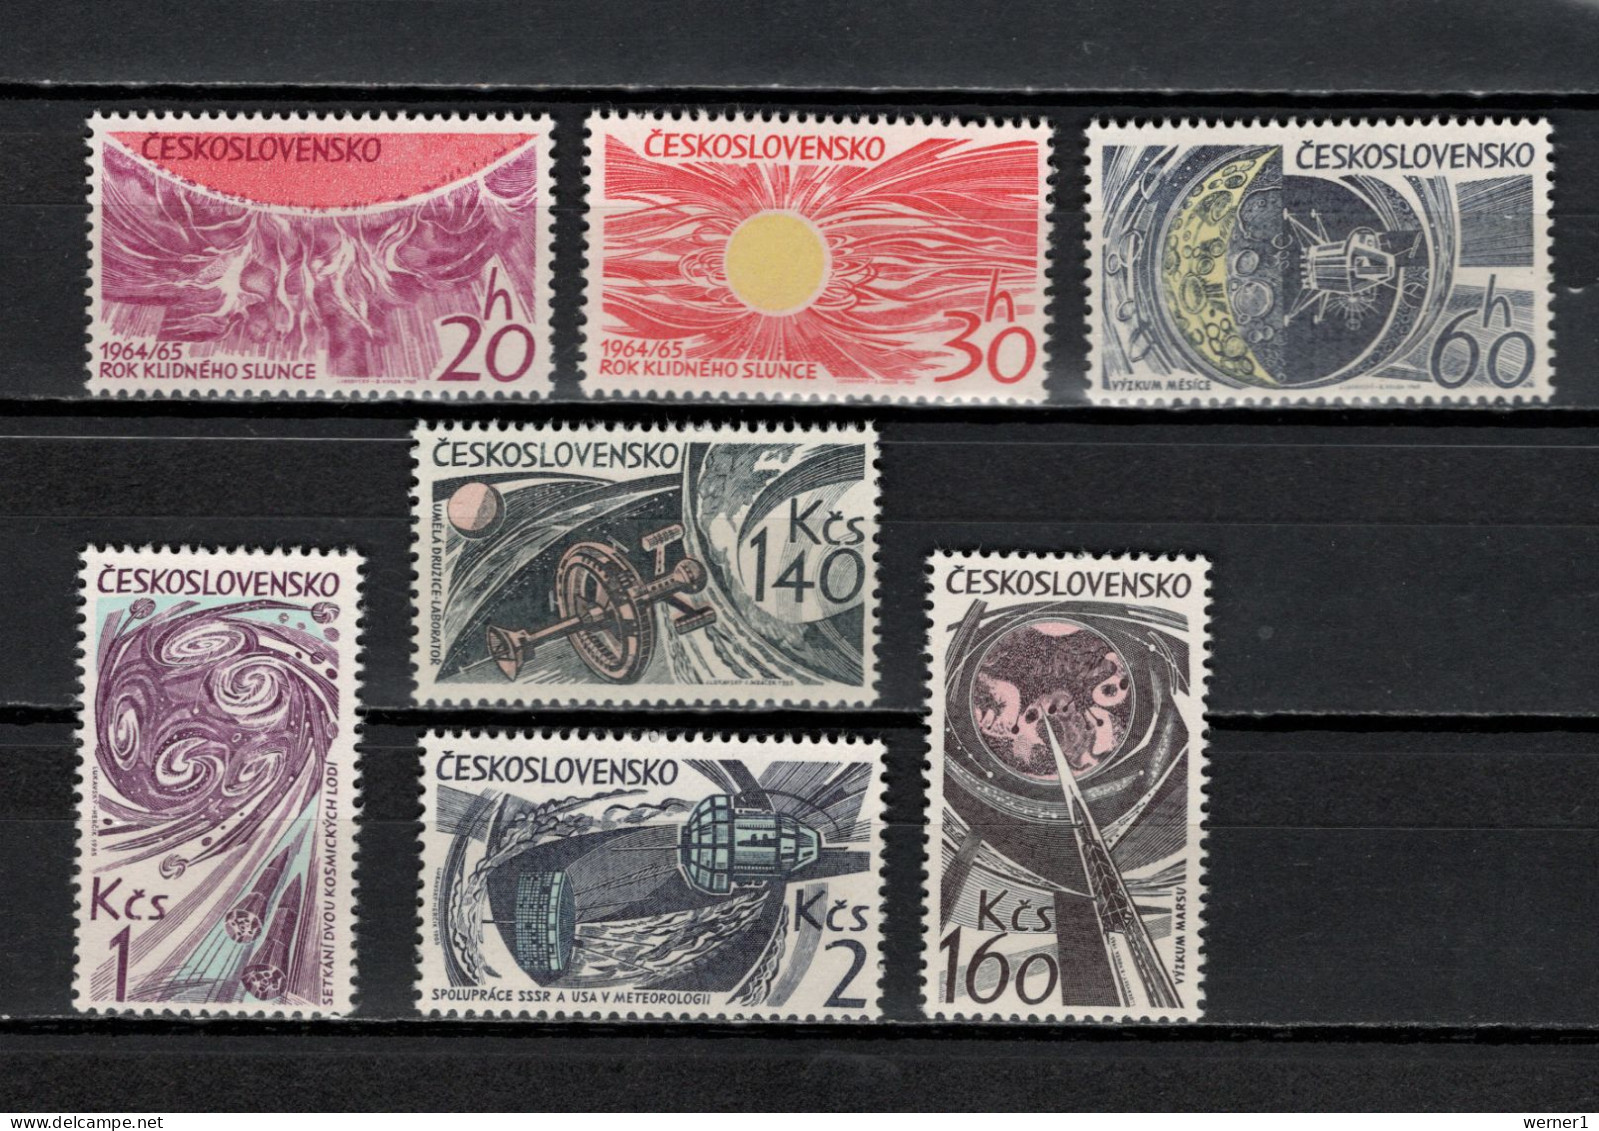 Czechoslovakia 1965 Space Research Set Of 7 MNH - Europe